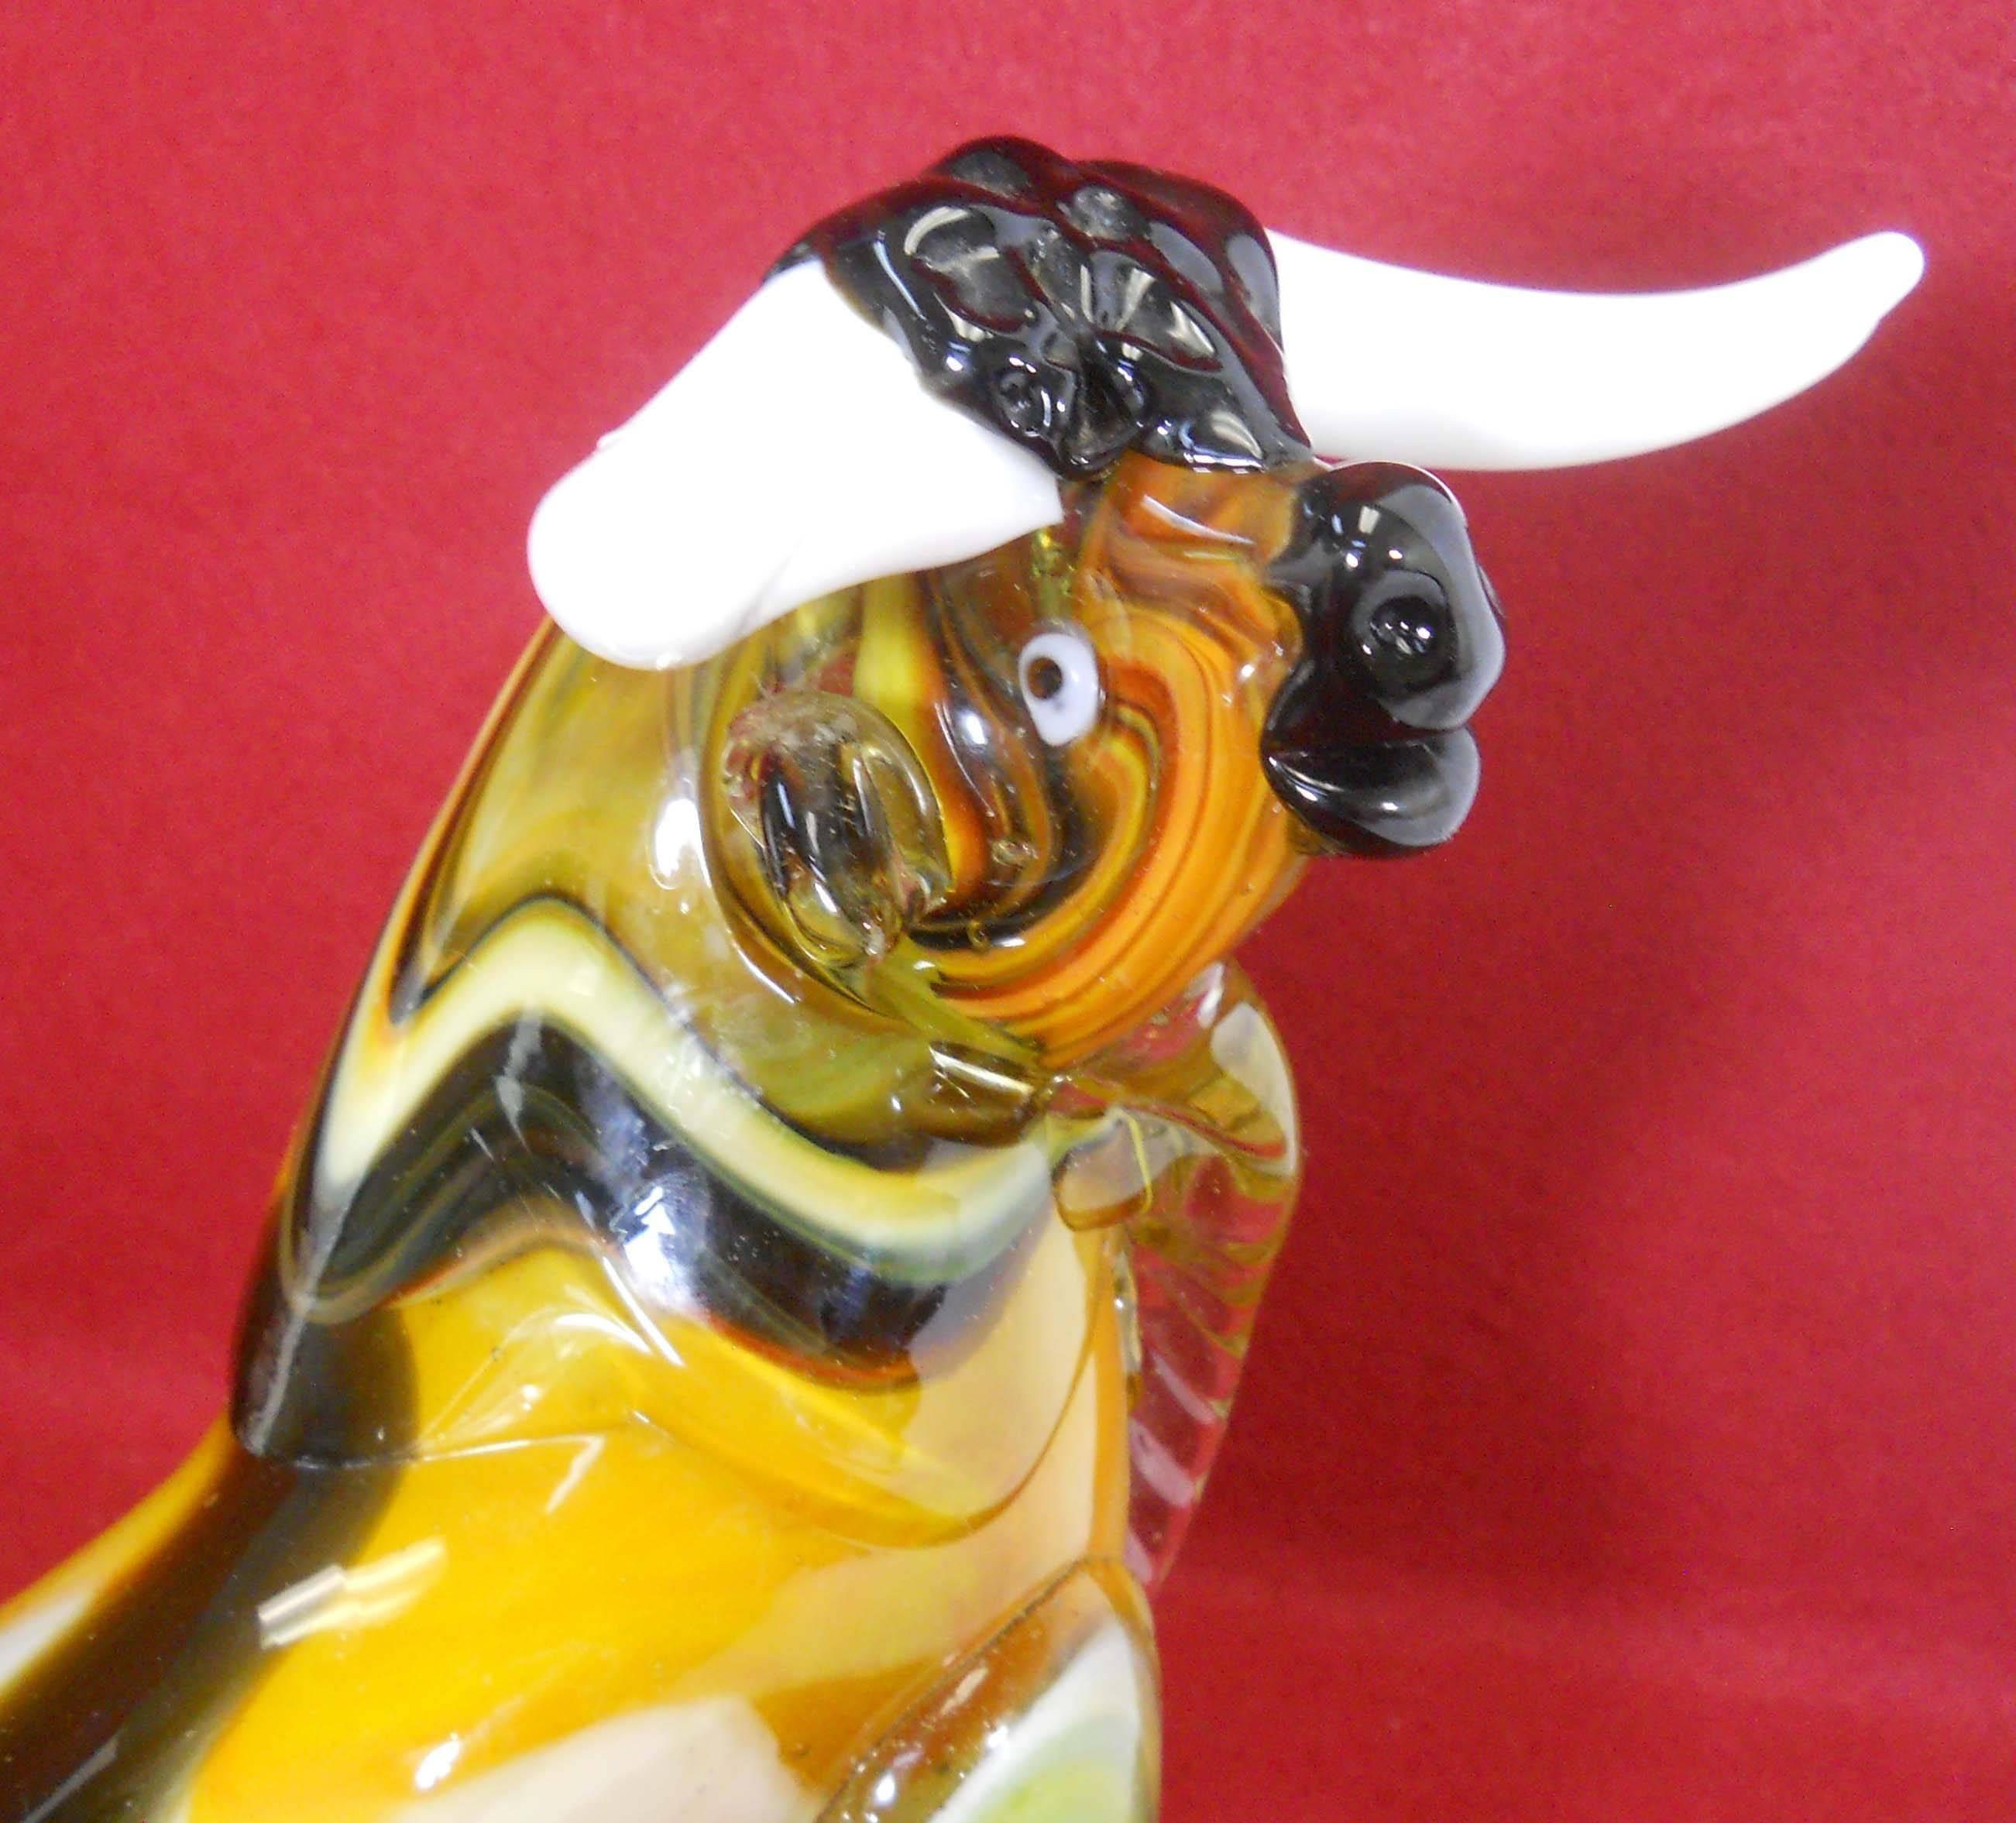 Hand-Crafted Murano Glass Bull Figurine, Motled Coloring with White Horns